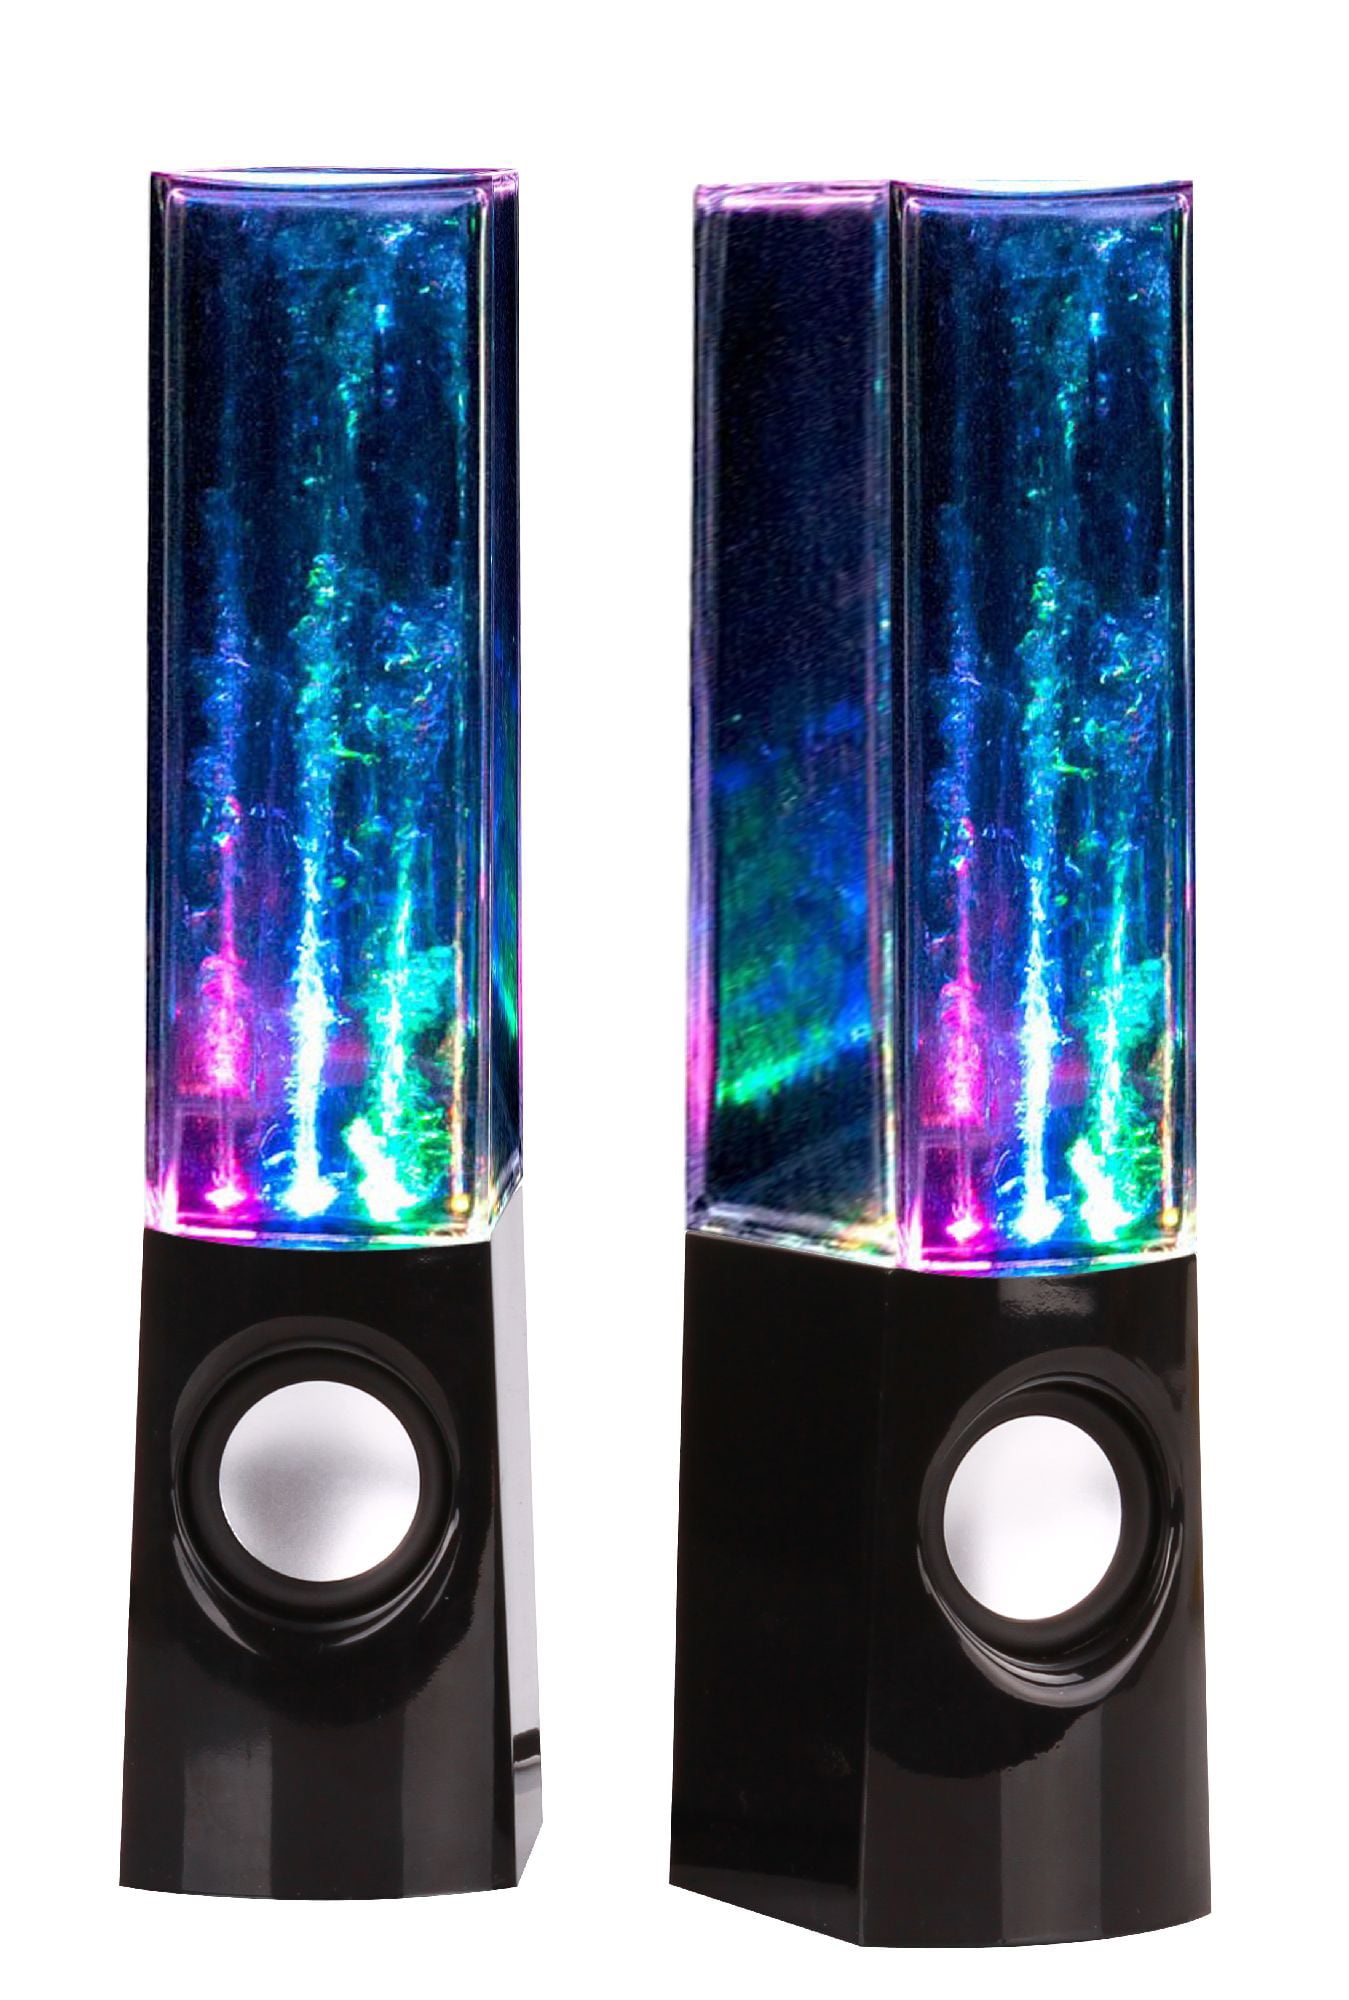 New in Box Dancing LED Water Speakers with Blue Base 